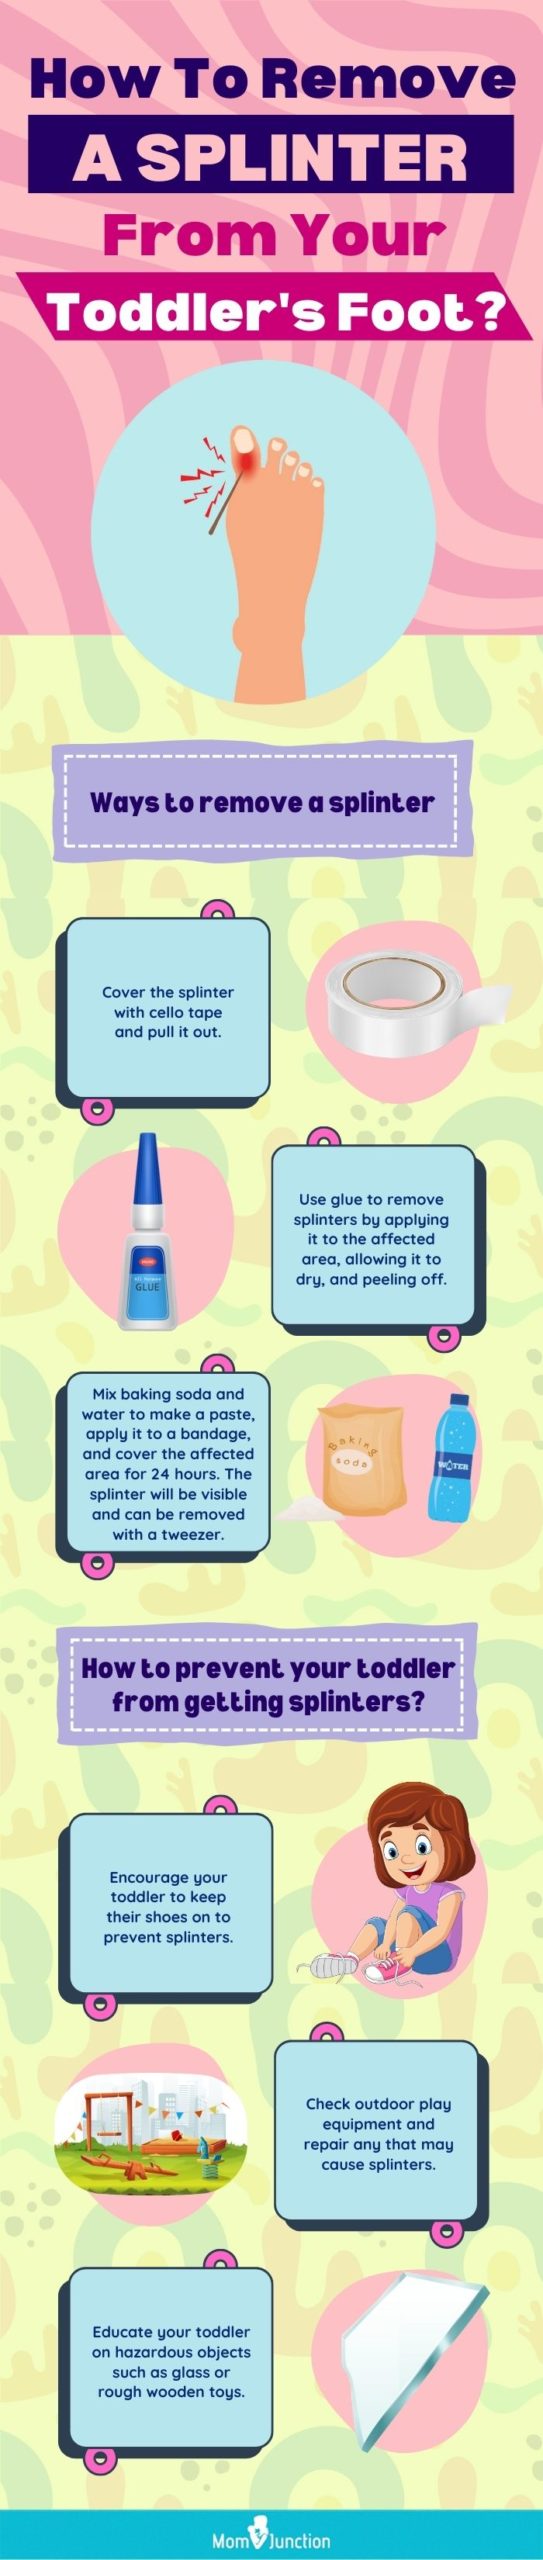 how to remove a splinter from your toddler's foot (infographic)